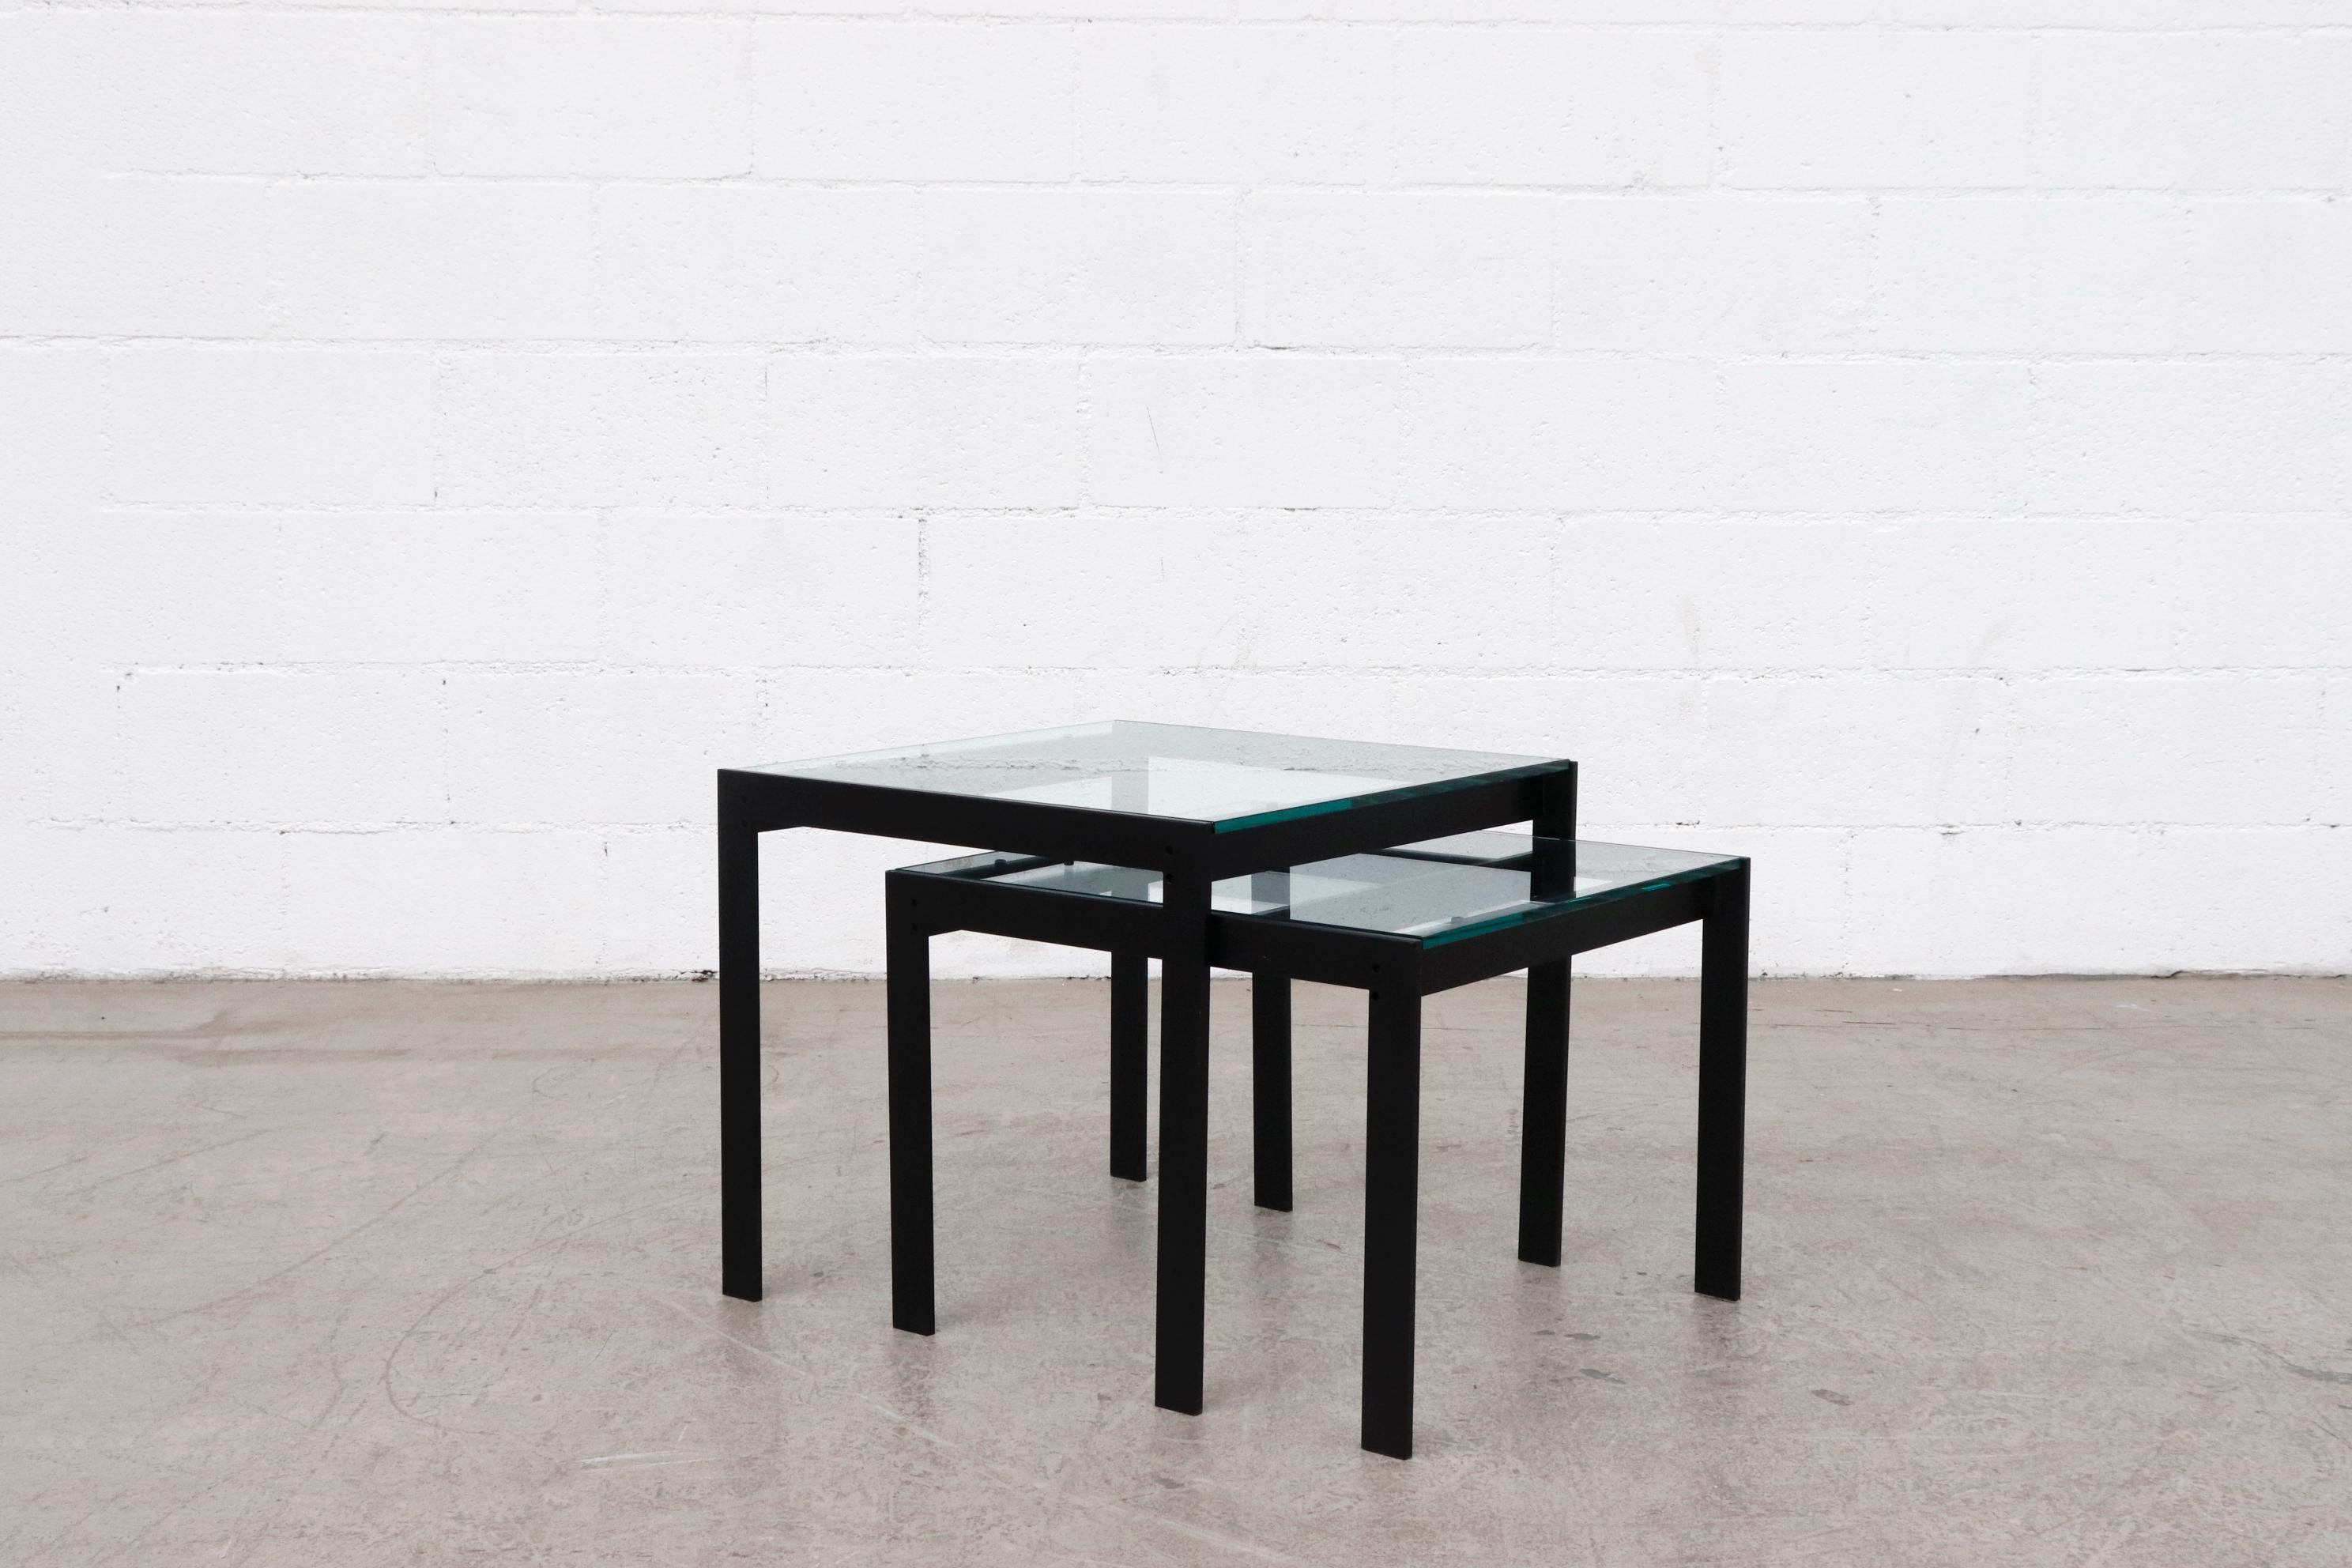 Amazing pair of Metaform attributed nesting tables with black powder coated aluminum frames and thick new square glass tops. Smaller table measures 19.5 x 19.5 x 15.63. In overall impressive condition with some wear consistent with age and use.